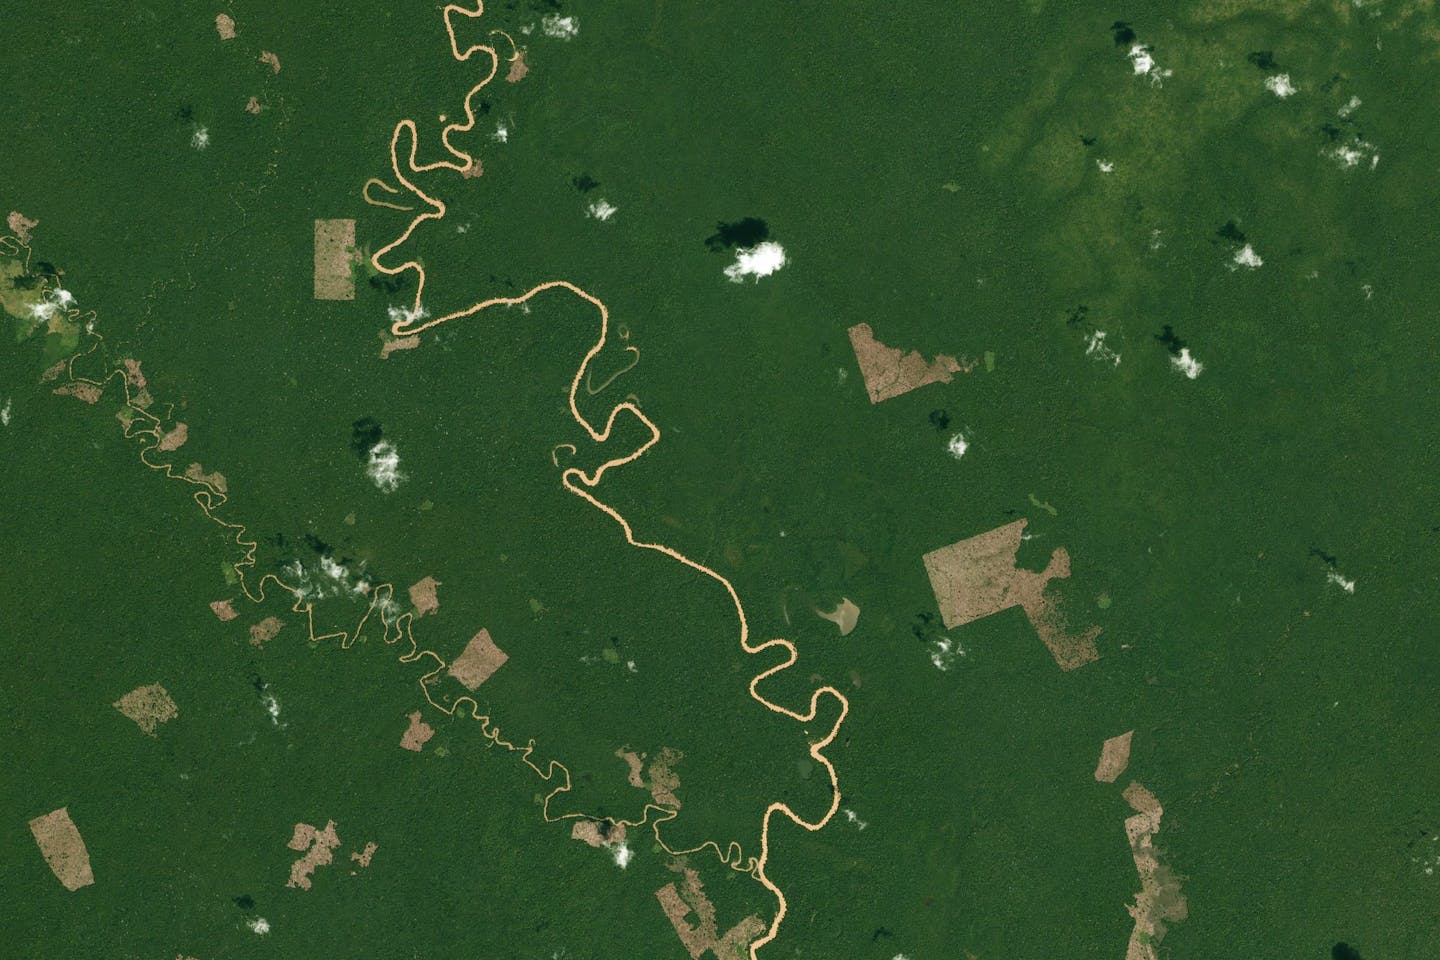 In the Colombian Amazon, PlanetScope images from December 13th, 2017, to January 16th, 2021, show changes in forest cover in and around Chiribiquete National Park (most of the area right of the Yarí River). Researchers with the Monitoring of the Andean Amazon Project (MAAP) describe this area as part of Colombia’s “arc of deforestation” and have been documenting the deforestation trends across the region over time.